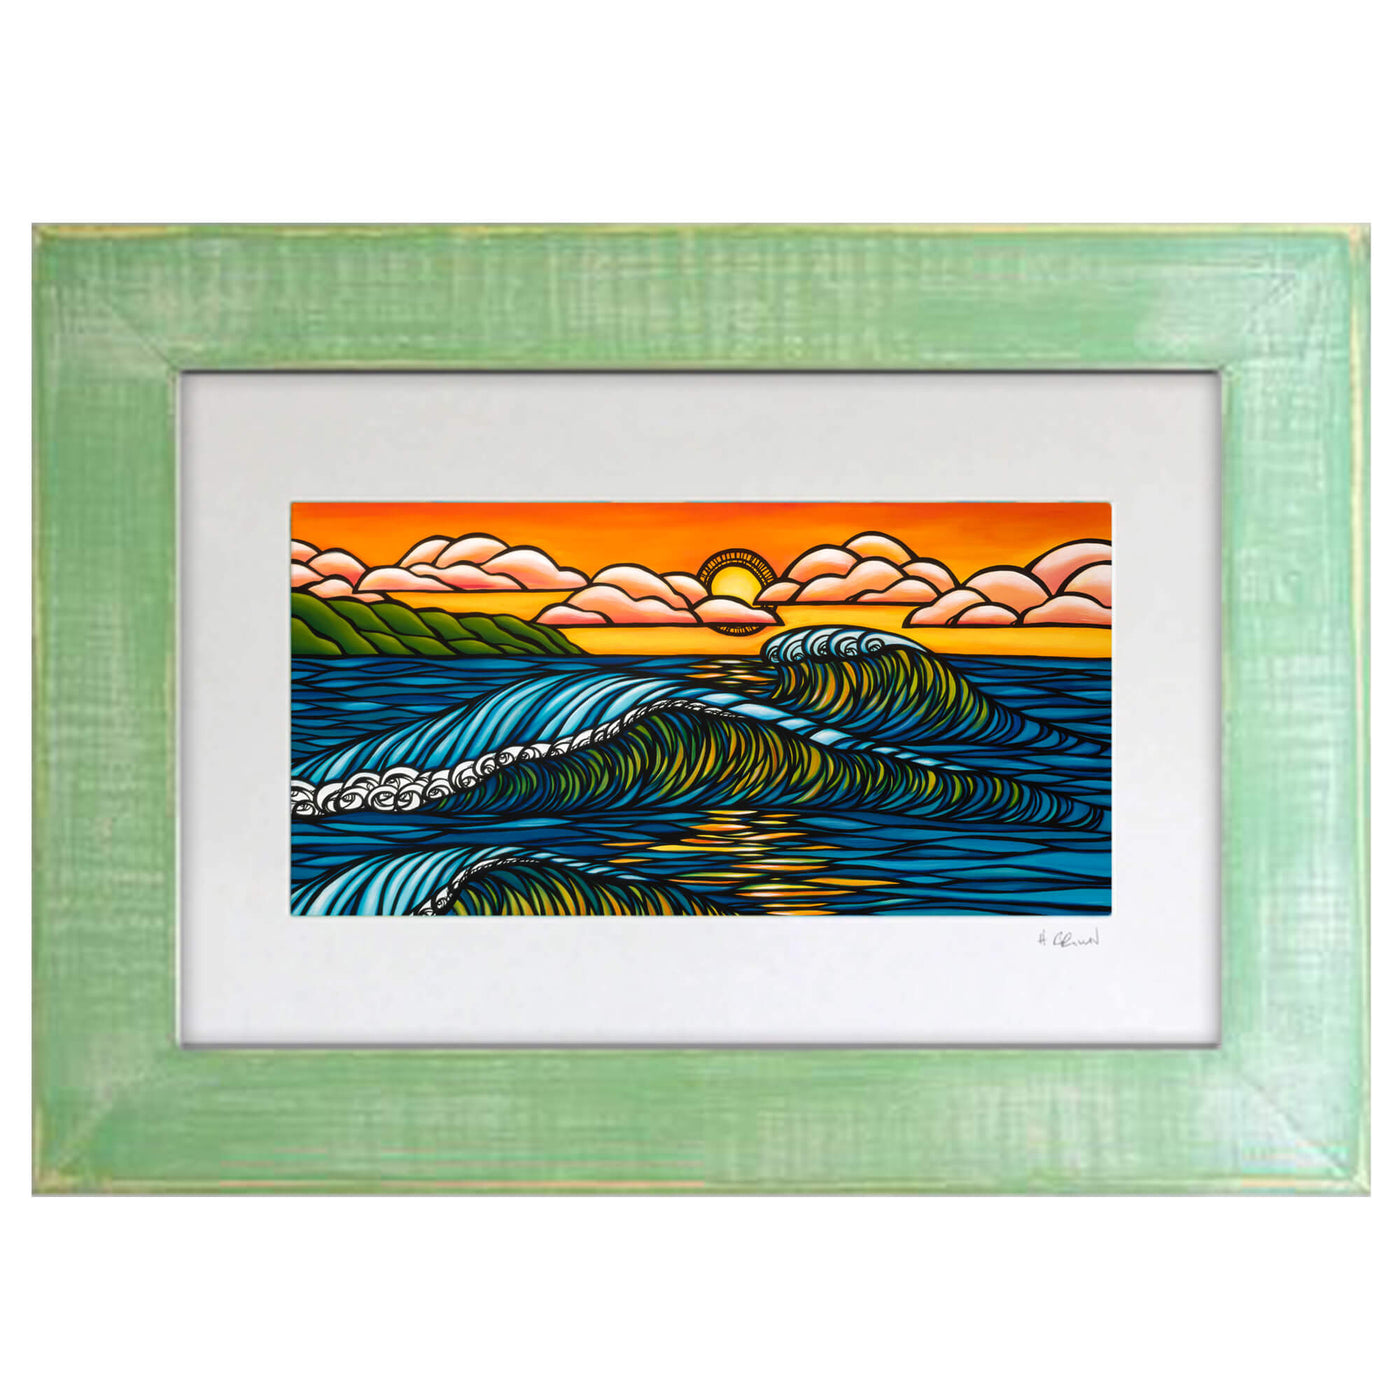 A framed matted art print featuring the sun sinking below the horizon at Haleiwa harbor, illuminating the rolling waves by Hawaii surf artist Heather Brown